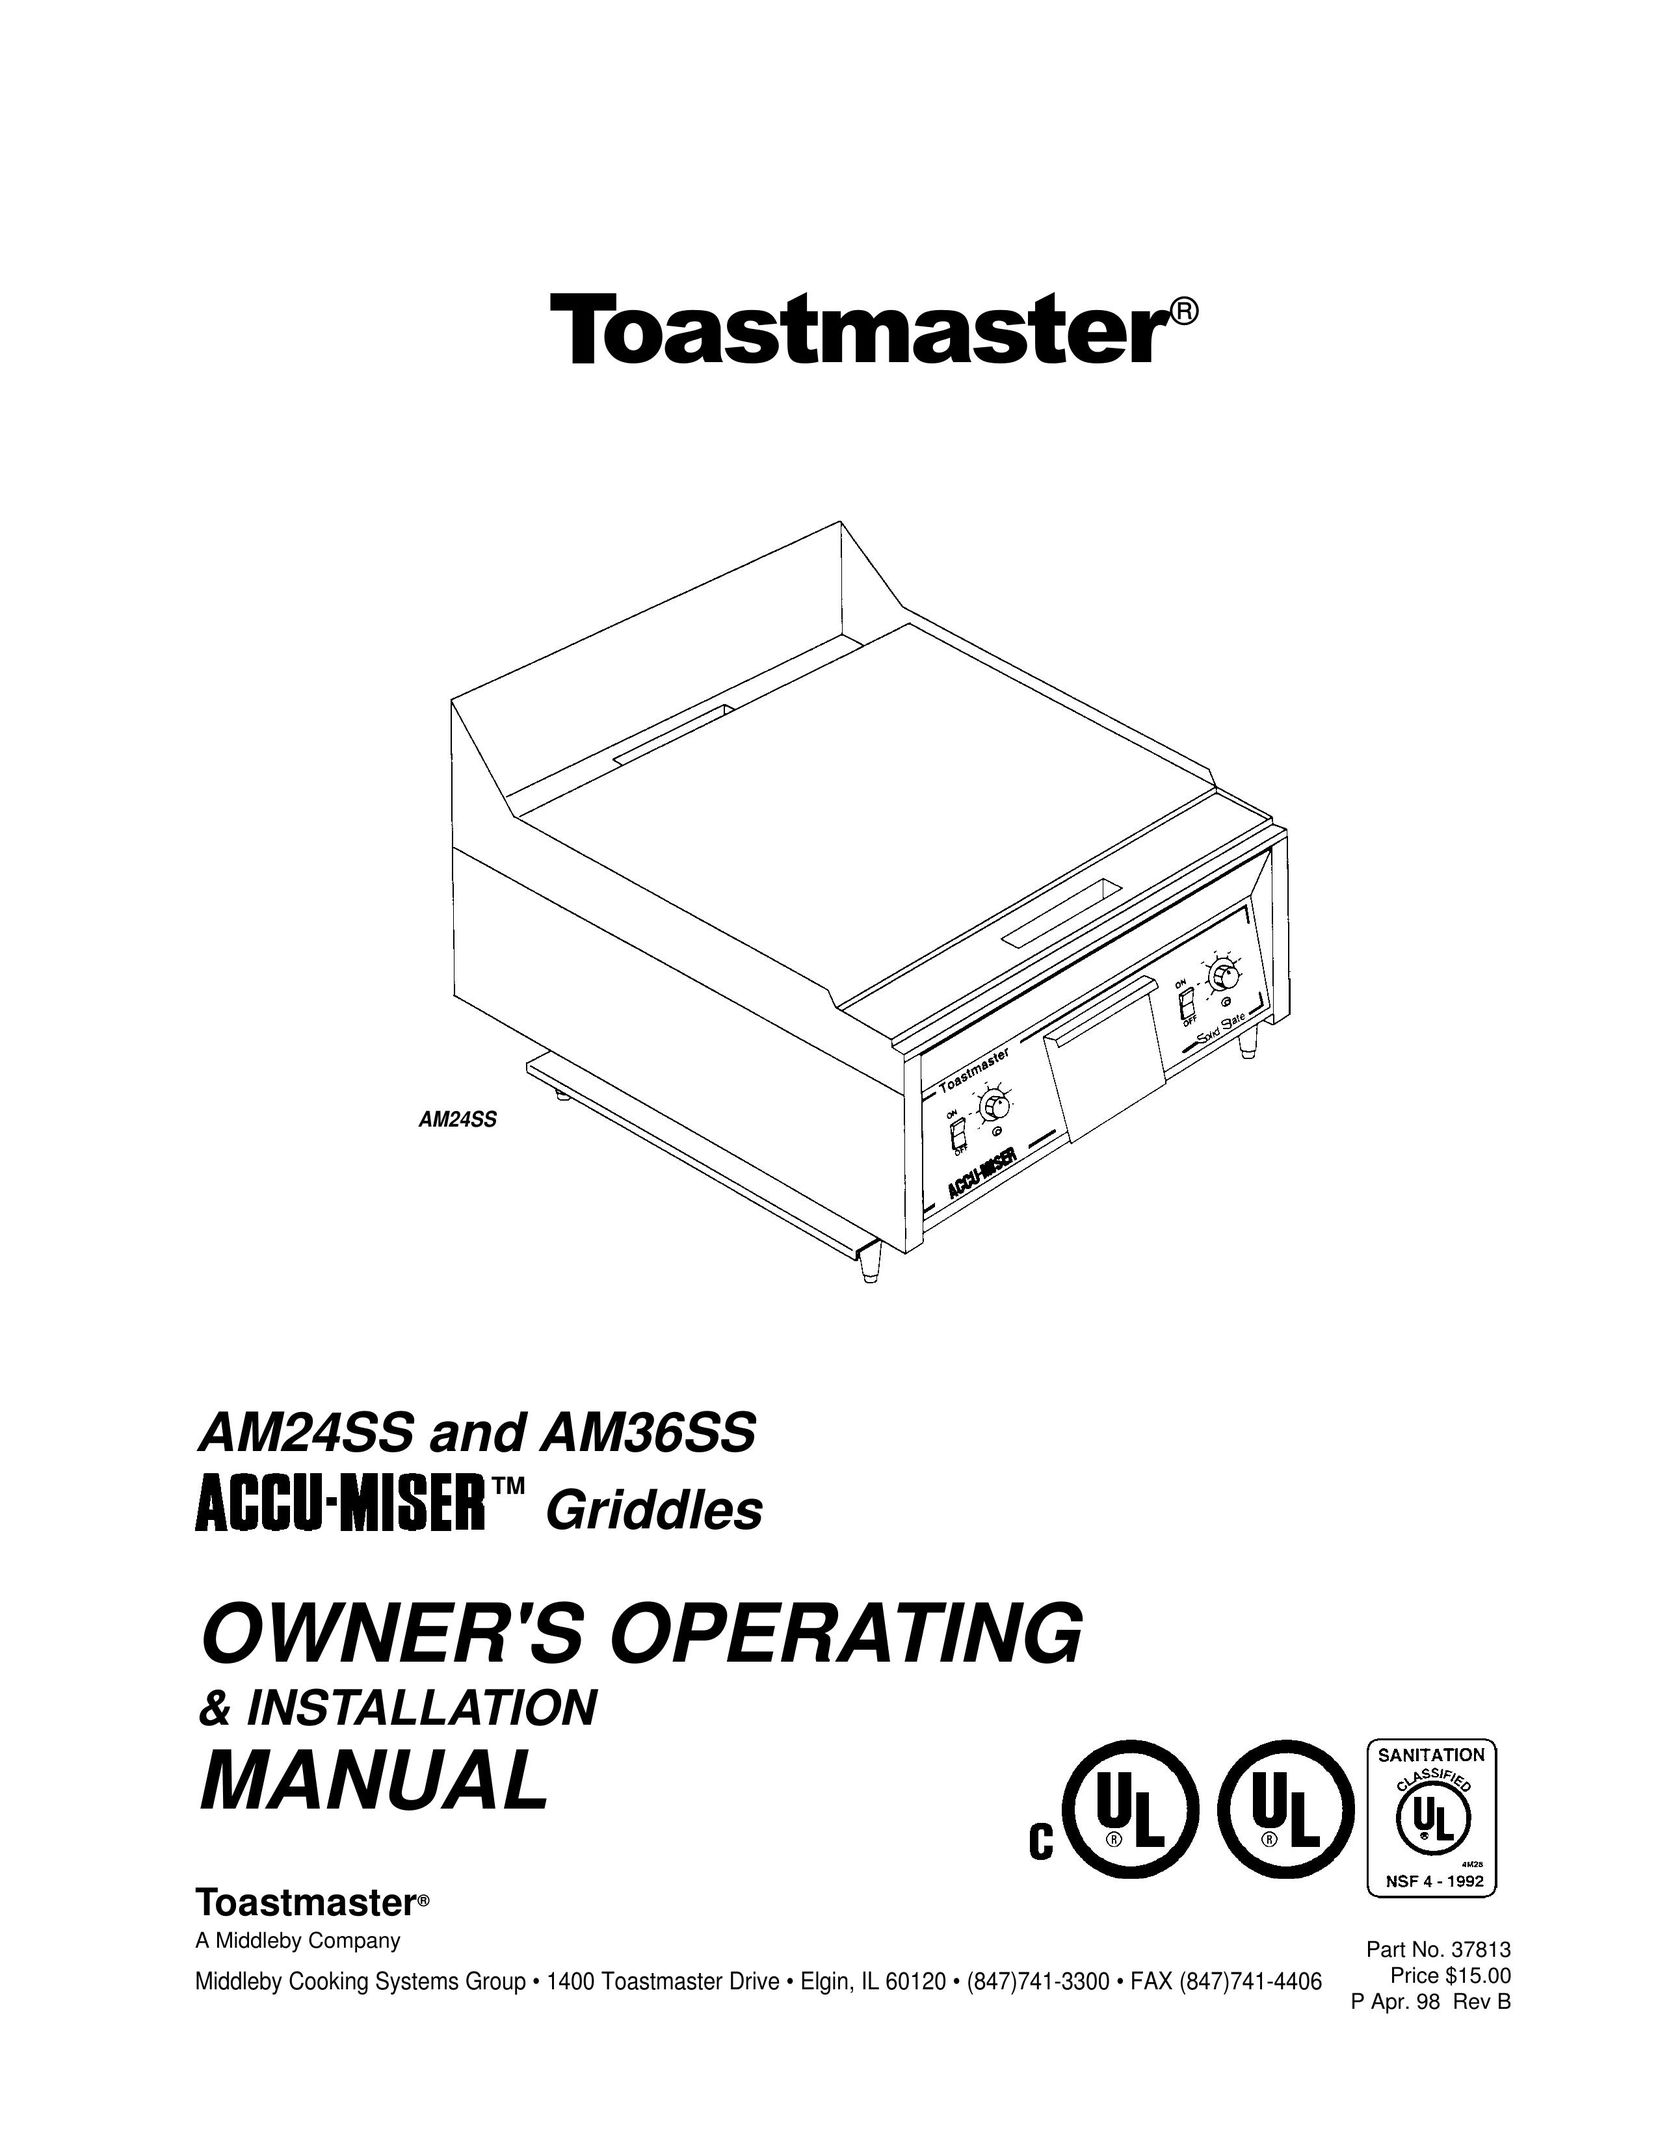 Toastmaster AM24SS Cooktop User Manual